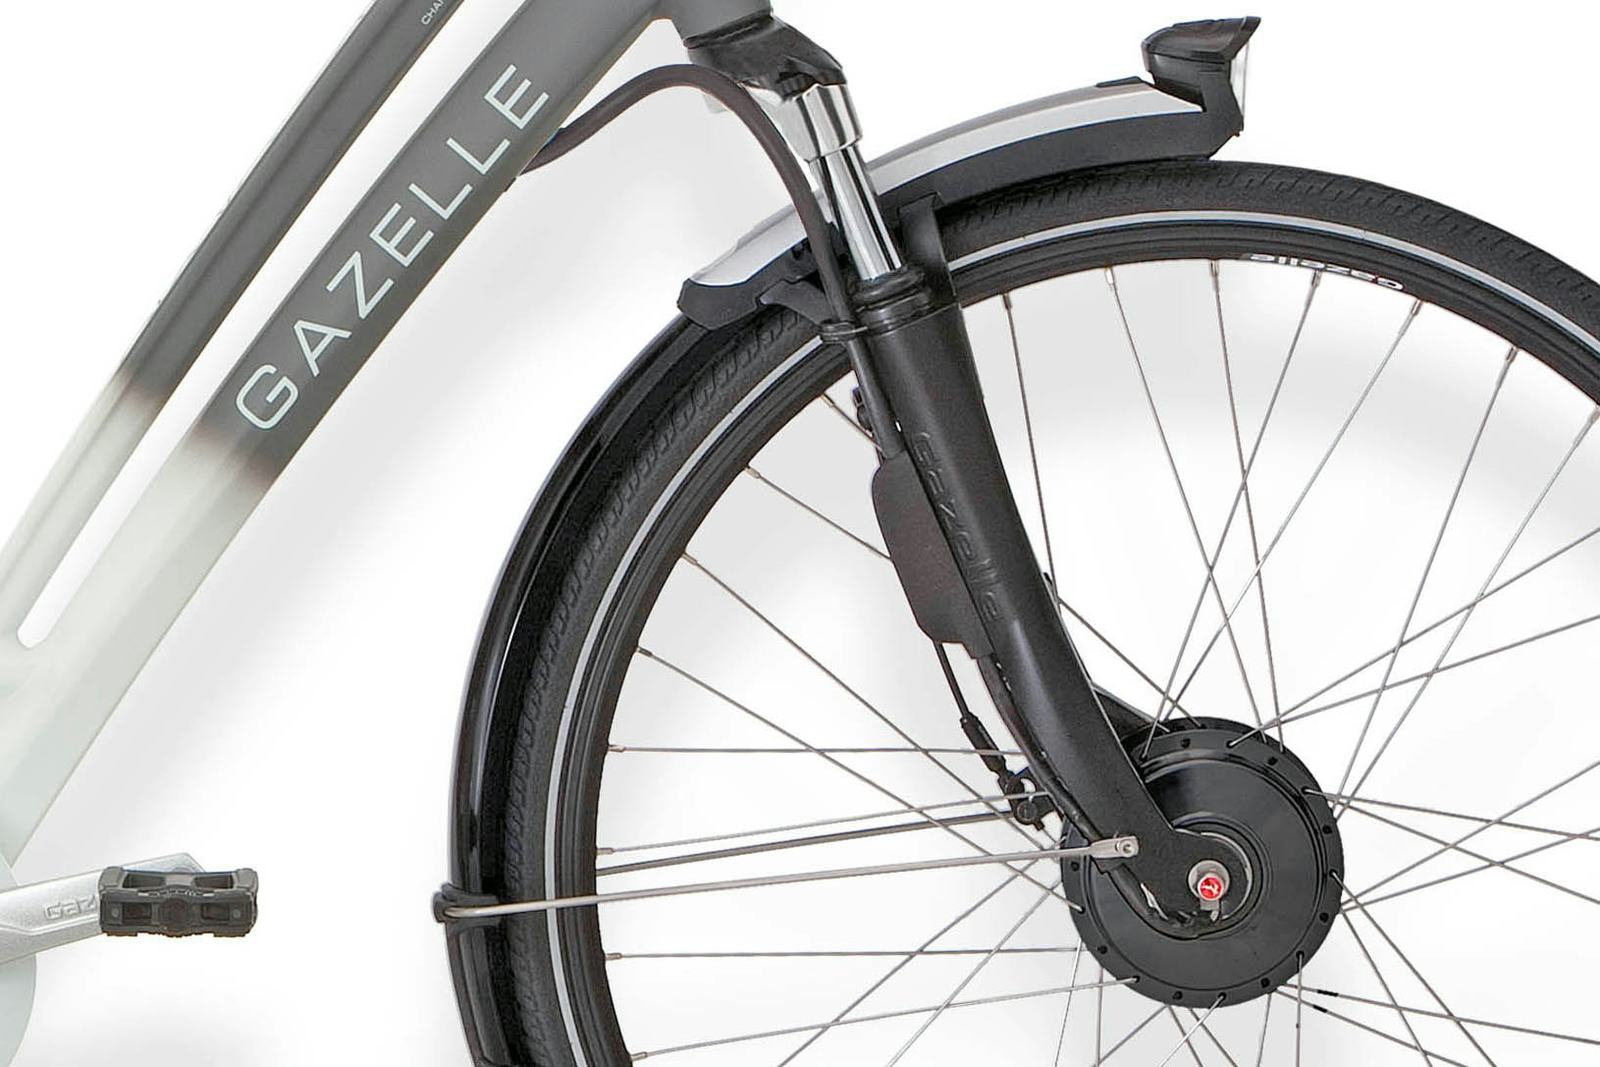 Continent lung aisle Gazelle Develops Front-Wheel System with Panasonic